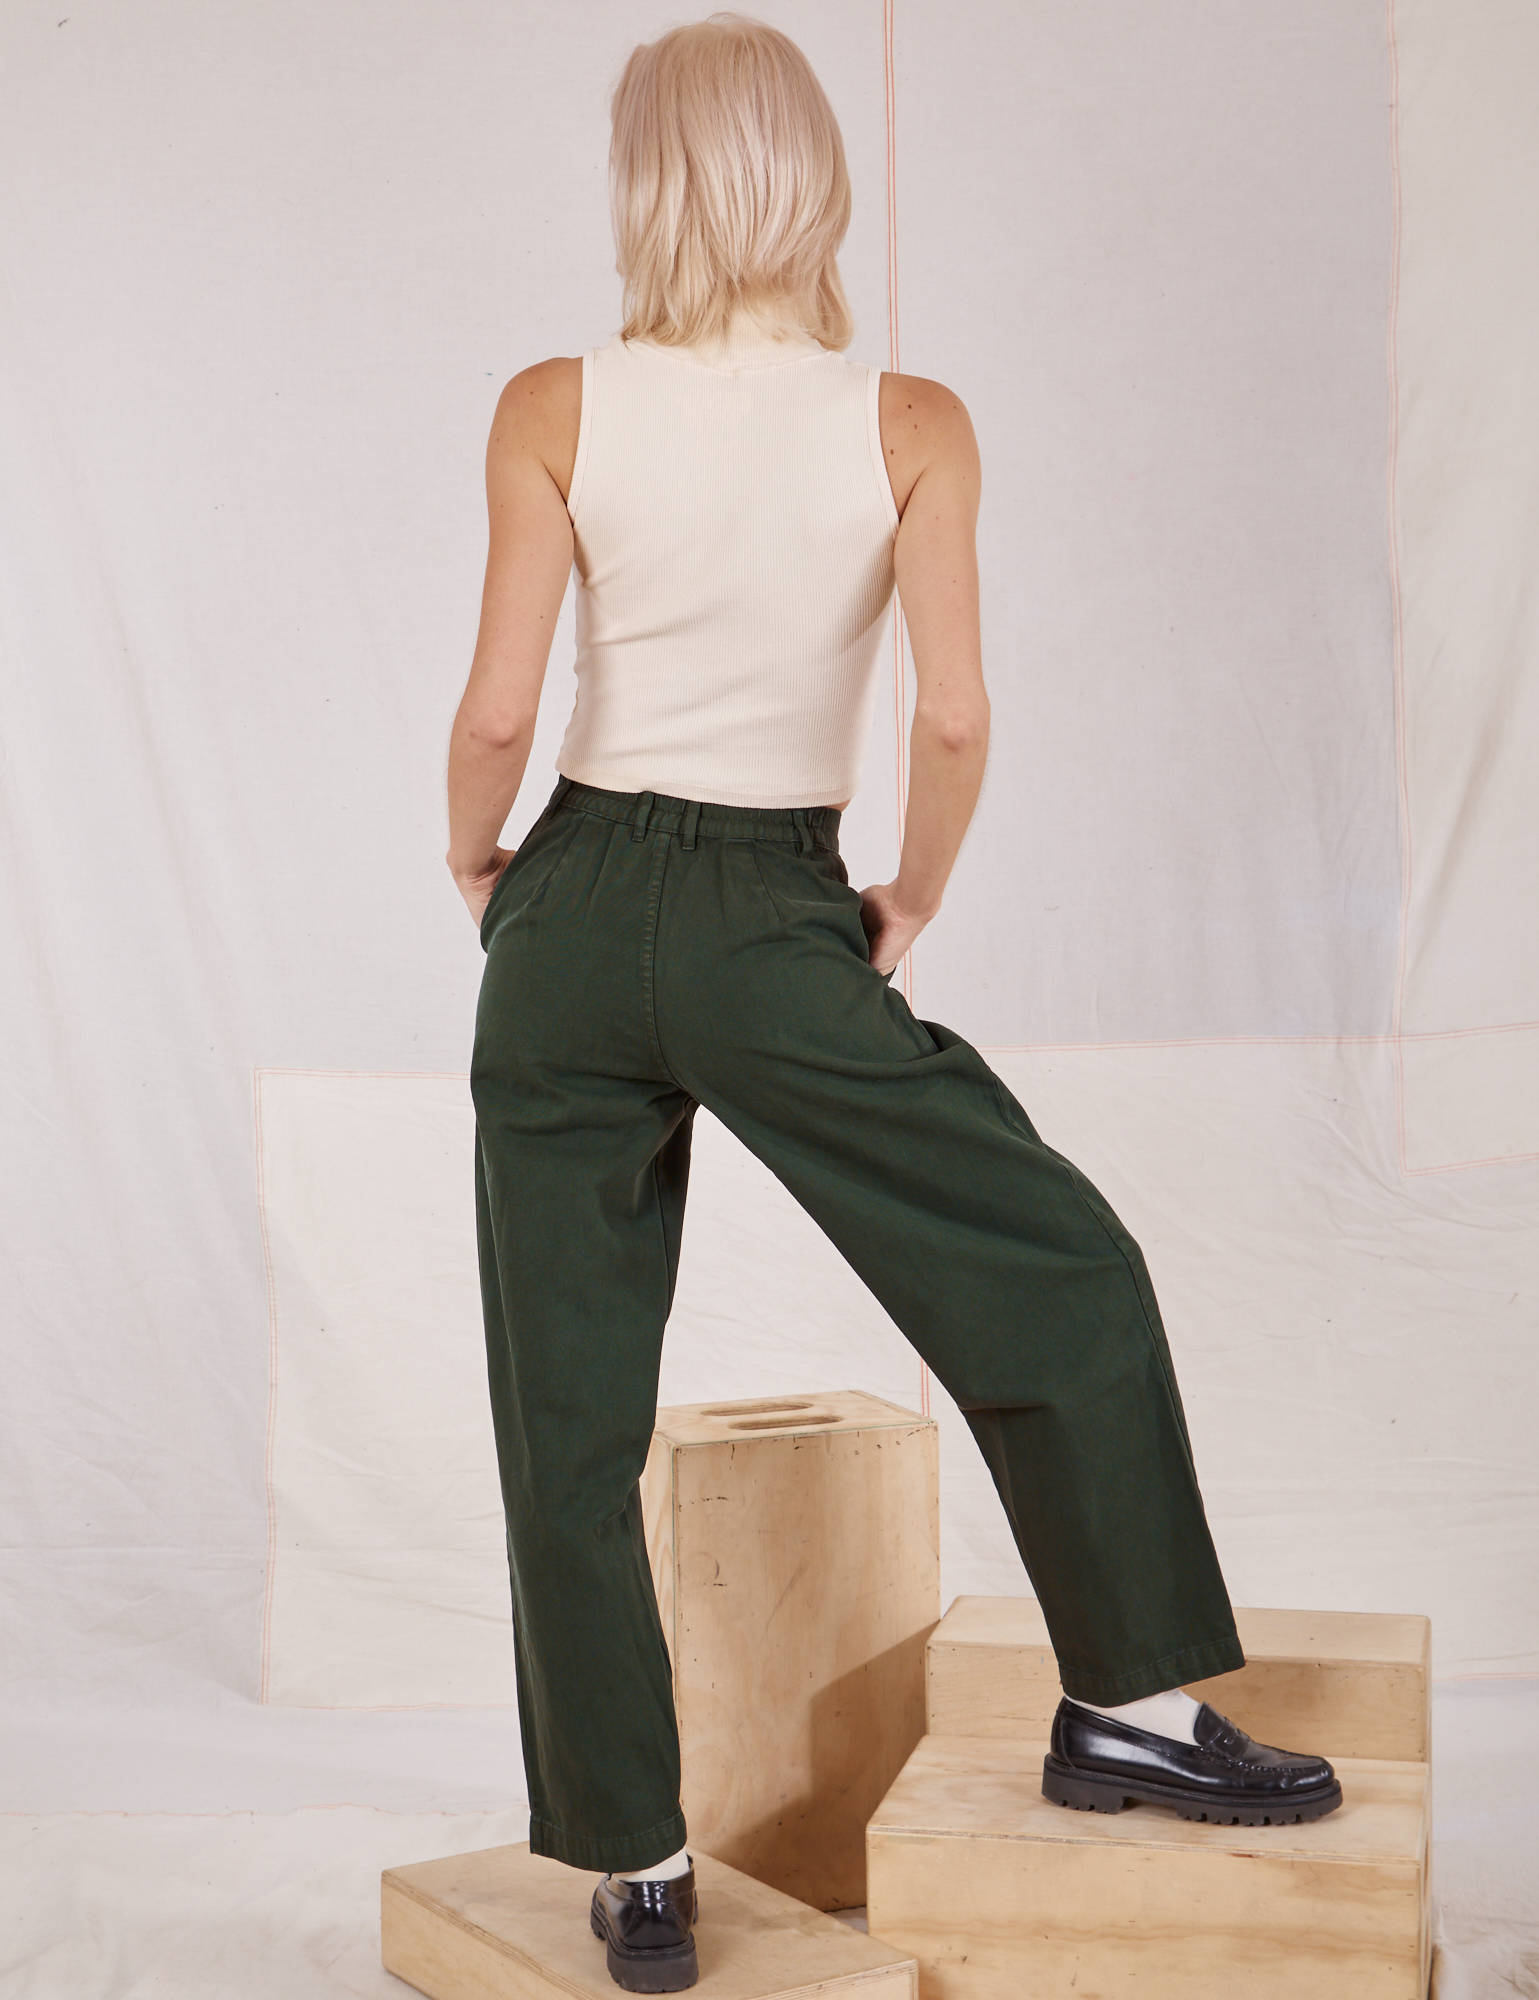 Back view of Heavyweight Trousers in Swamp Green and vintage tee off-white Sleeveless Turtleneck on Madeline